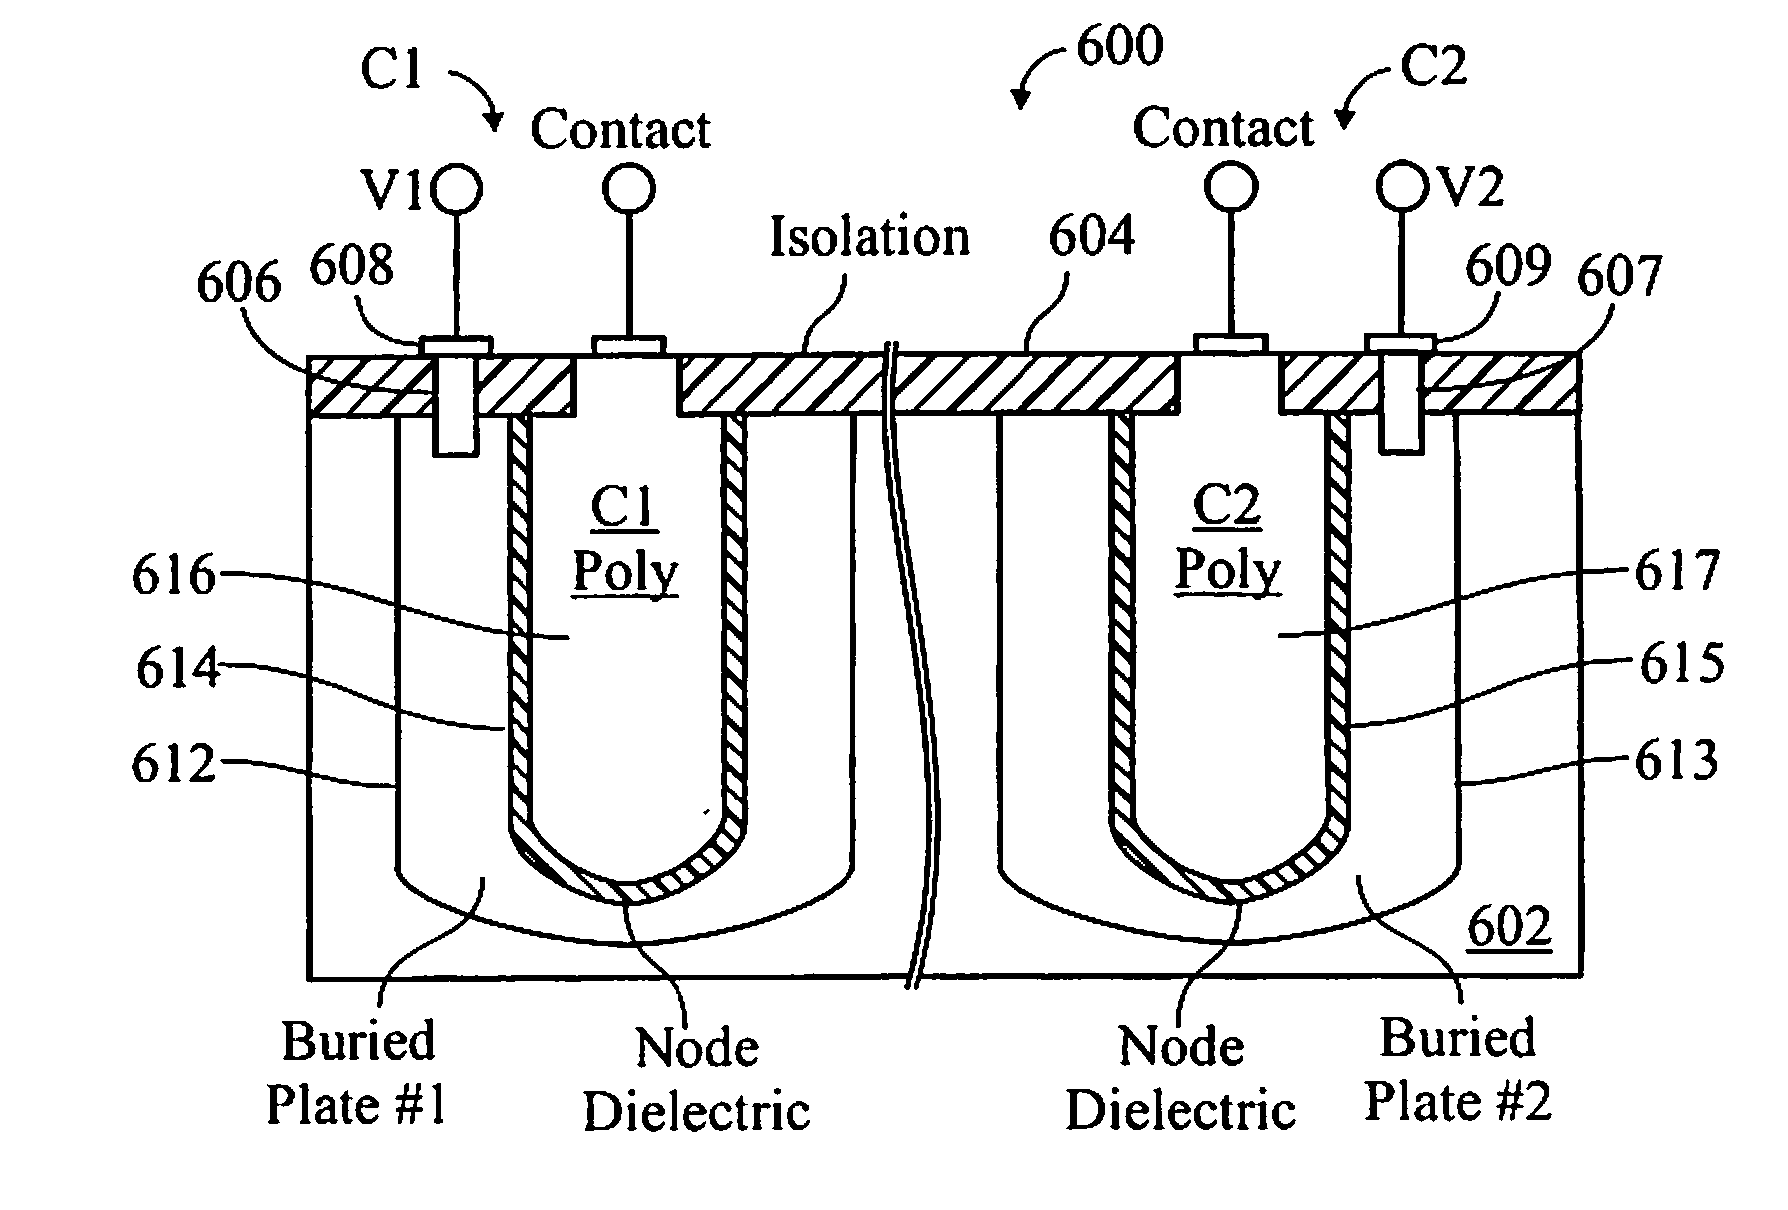 Dram having deep trench capacitors with lightly doped buried plates